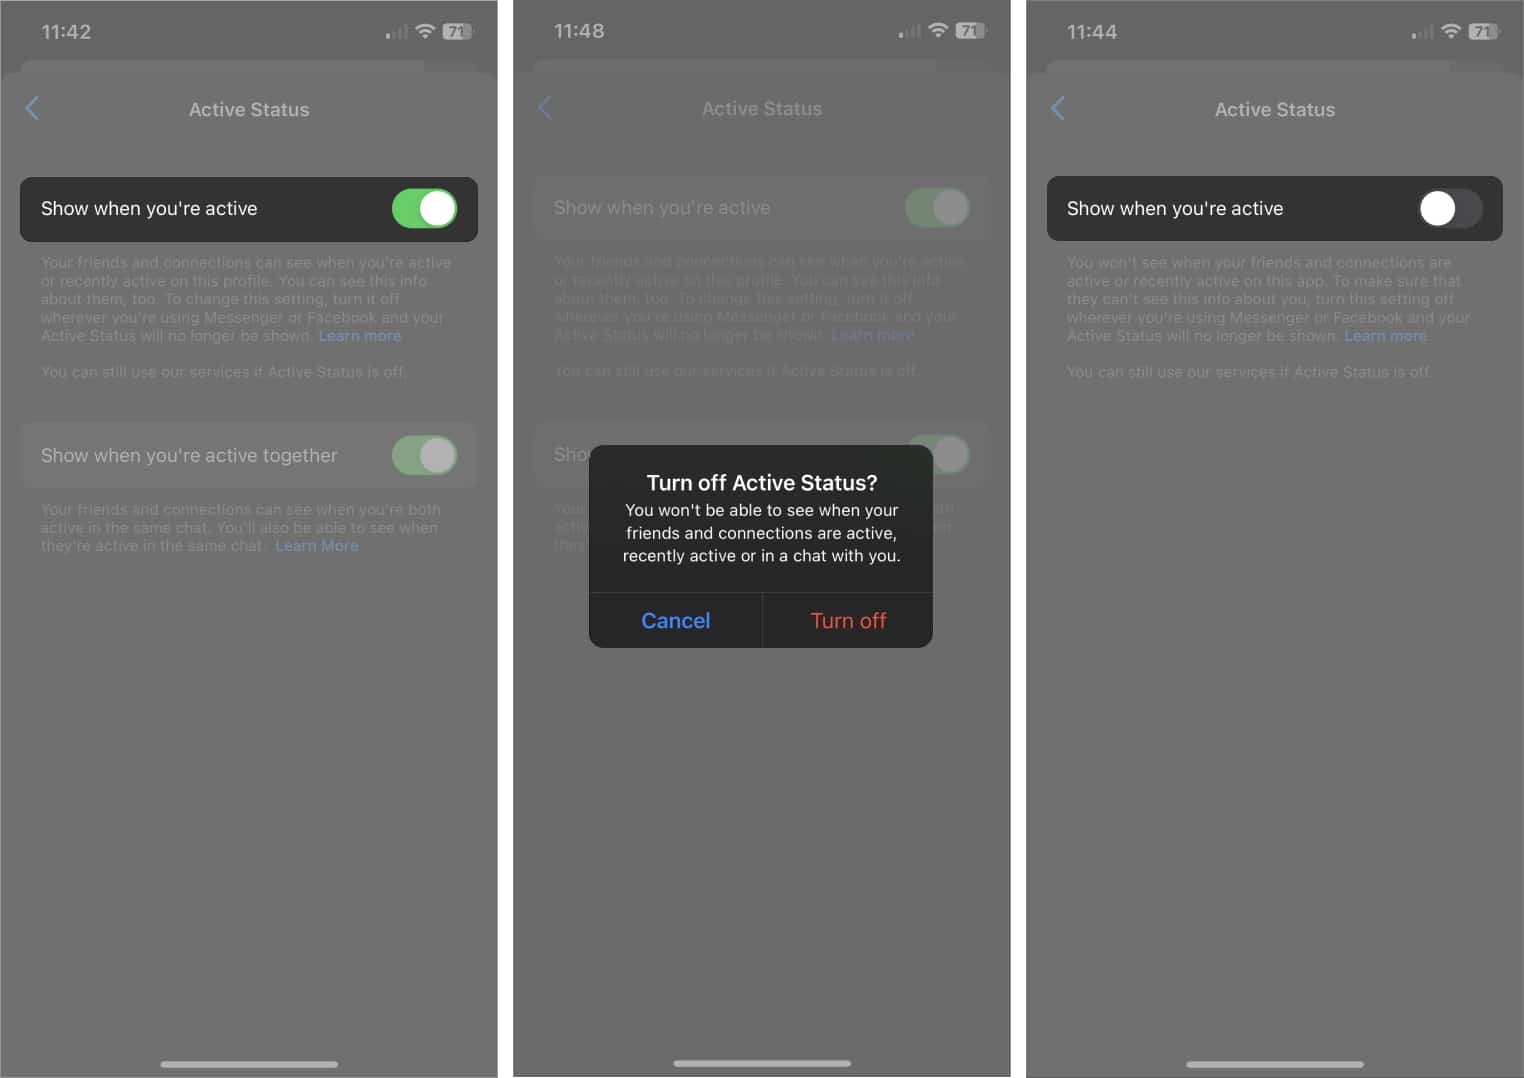 Turn your Active Status off from Messenger app on iPhone